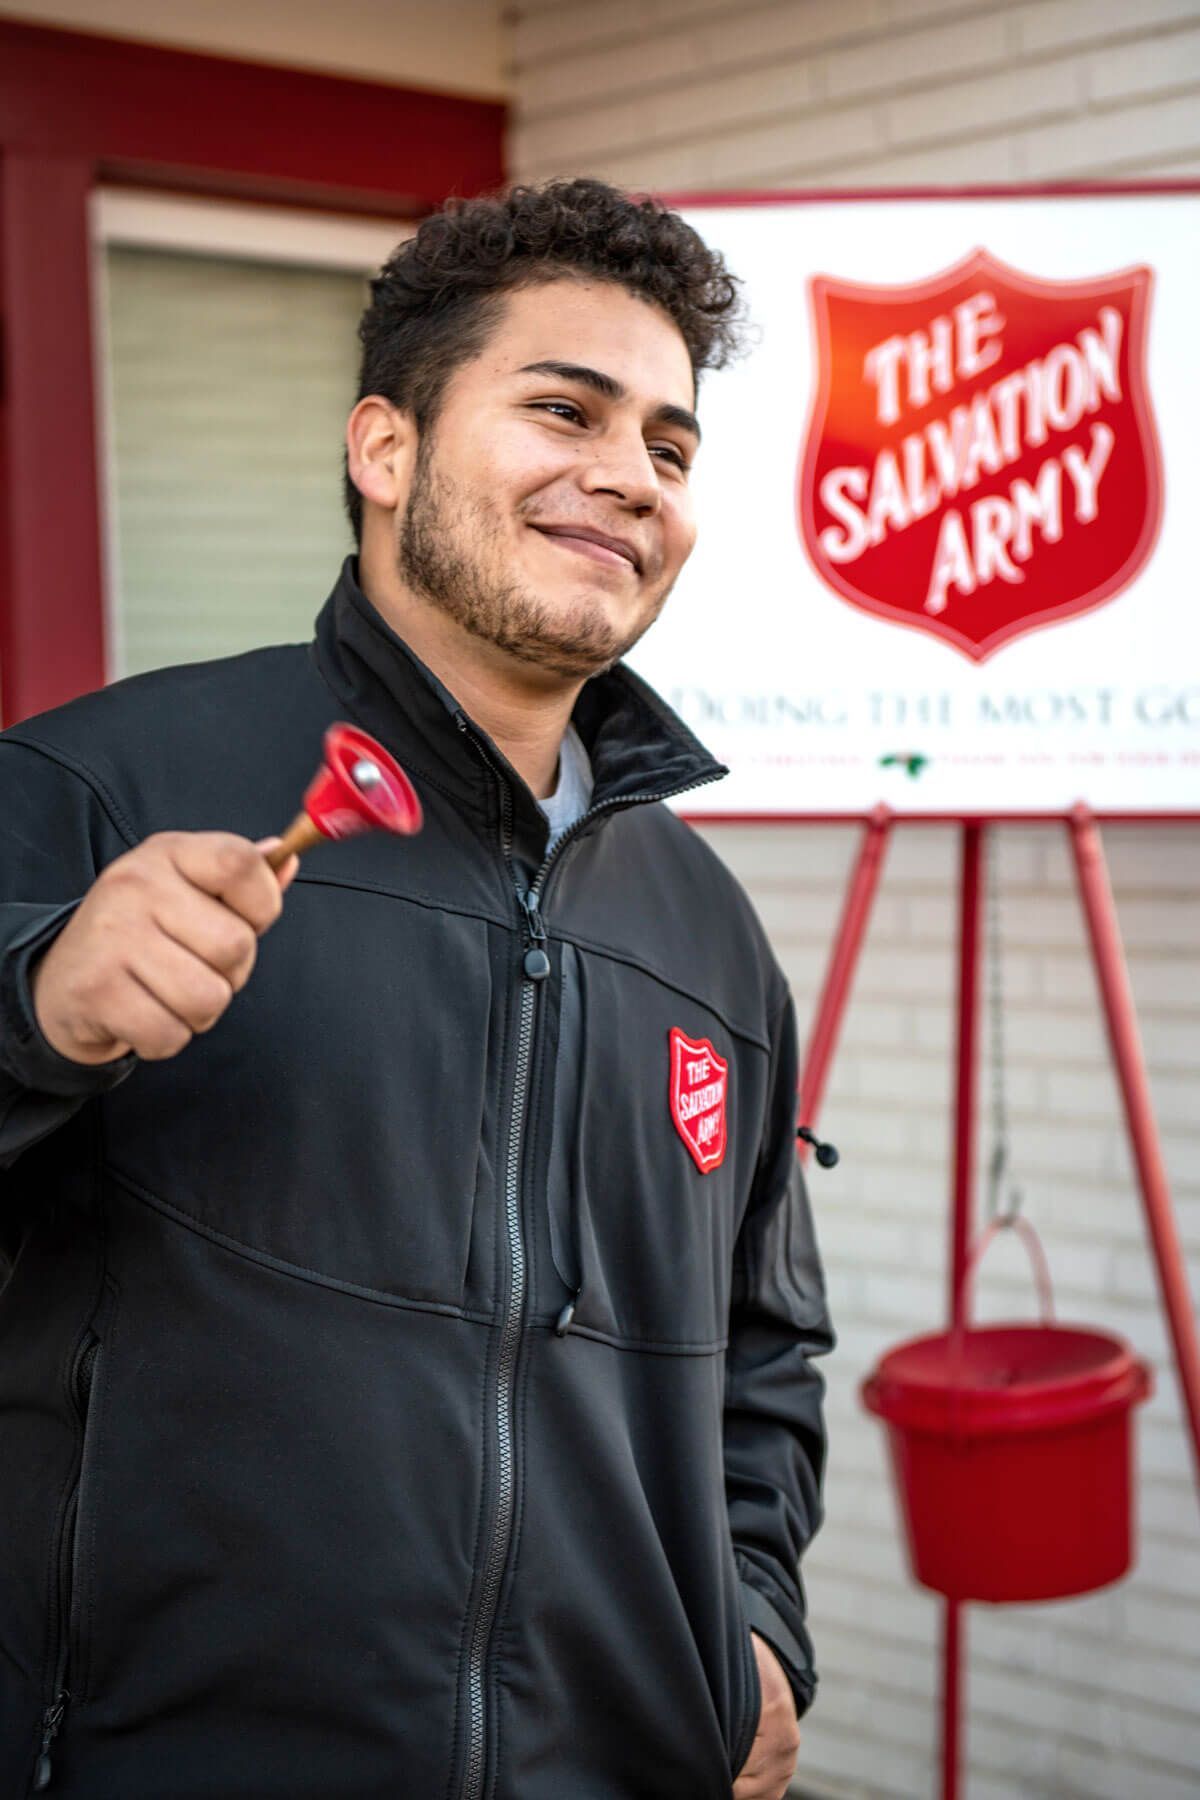 young man ringing bell to raise money for charity